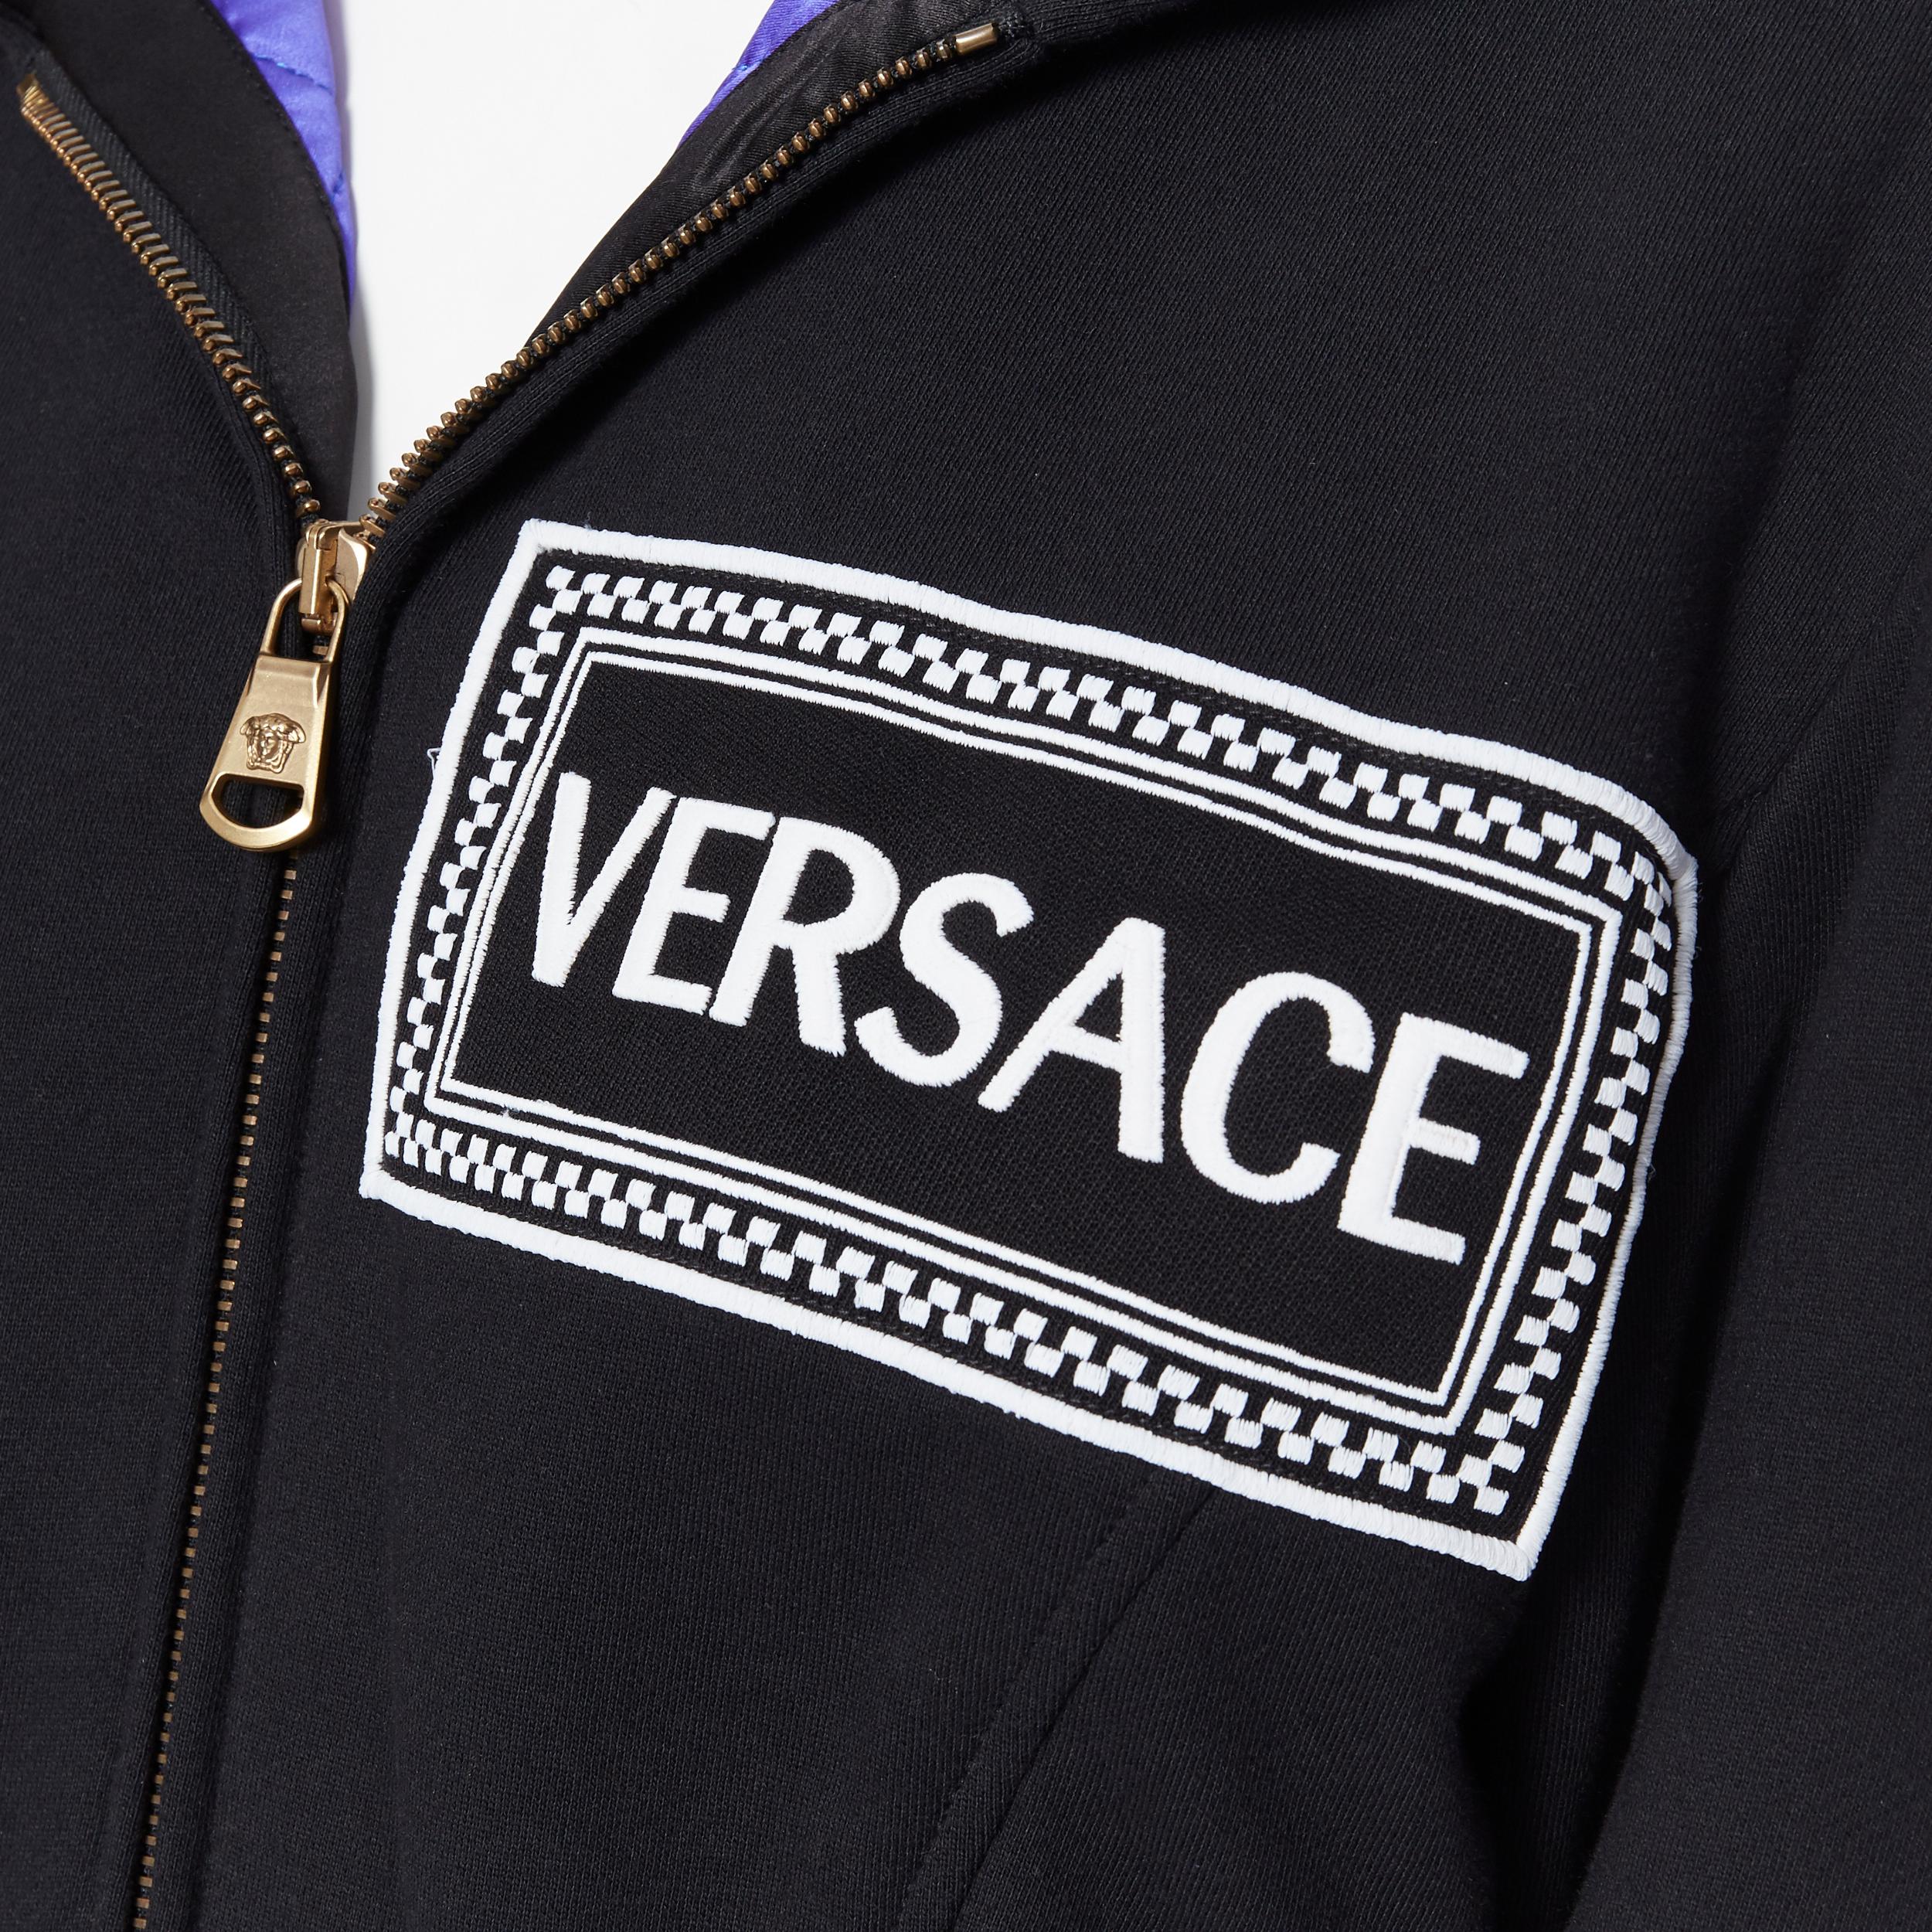 new VERSACE AW18 Pillow Talk 90's vintage logo purple quilted cropped hoodie XS
Brand: Versace
Designer: Donatella Versace
Collection: AW 2018
Model Name / Style: Hoodie
Material: Cotton
Color: Black, purple
Pattern: Solid
Closure: Zip
Extra Detail: